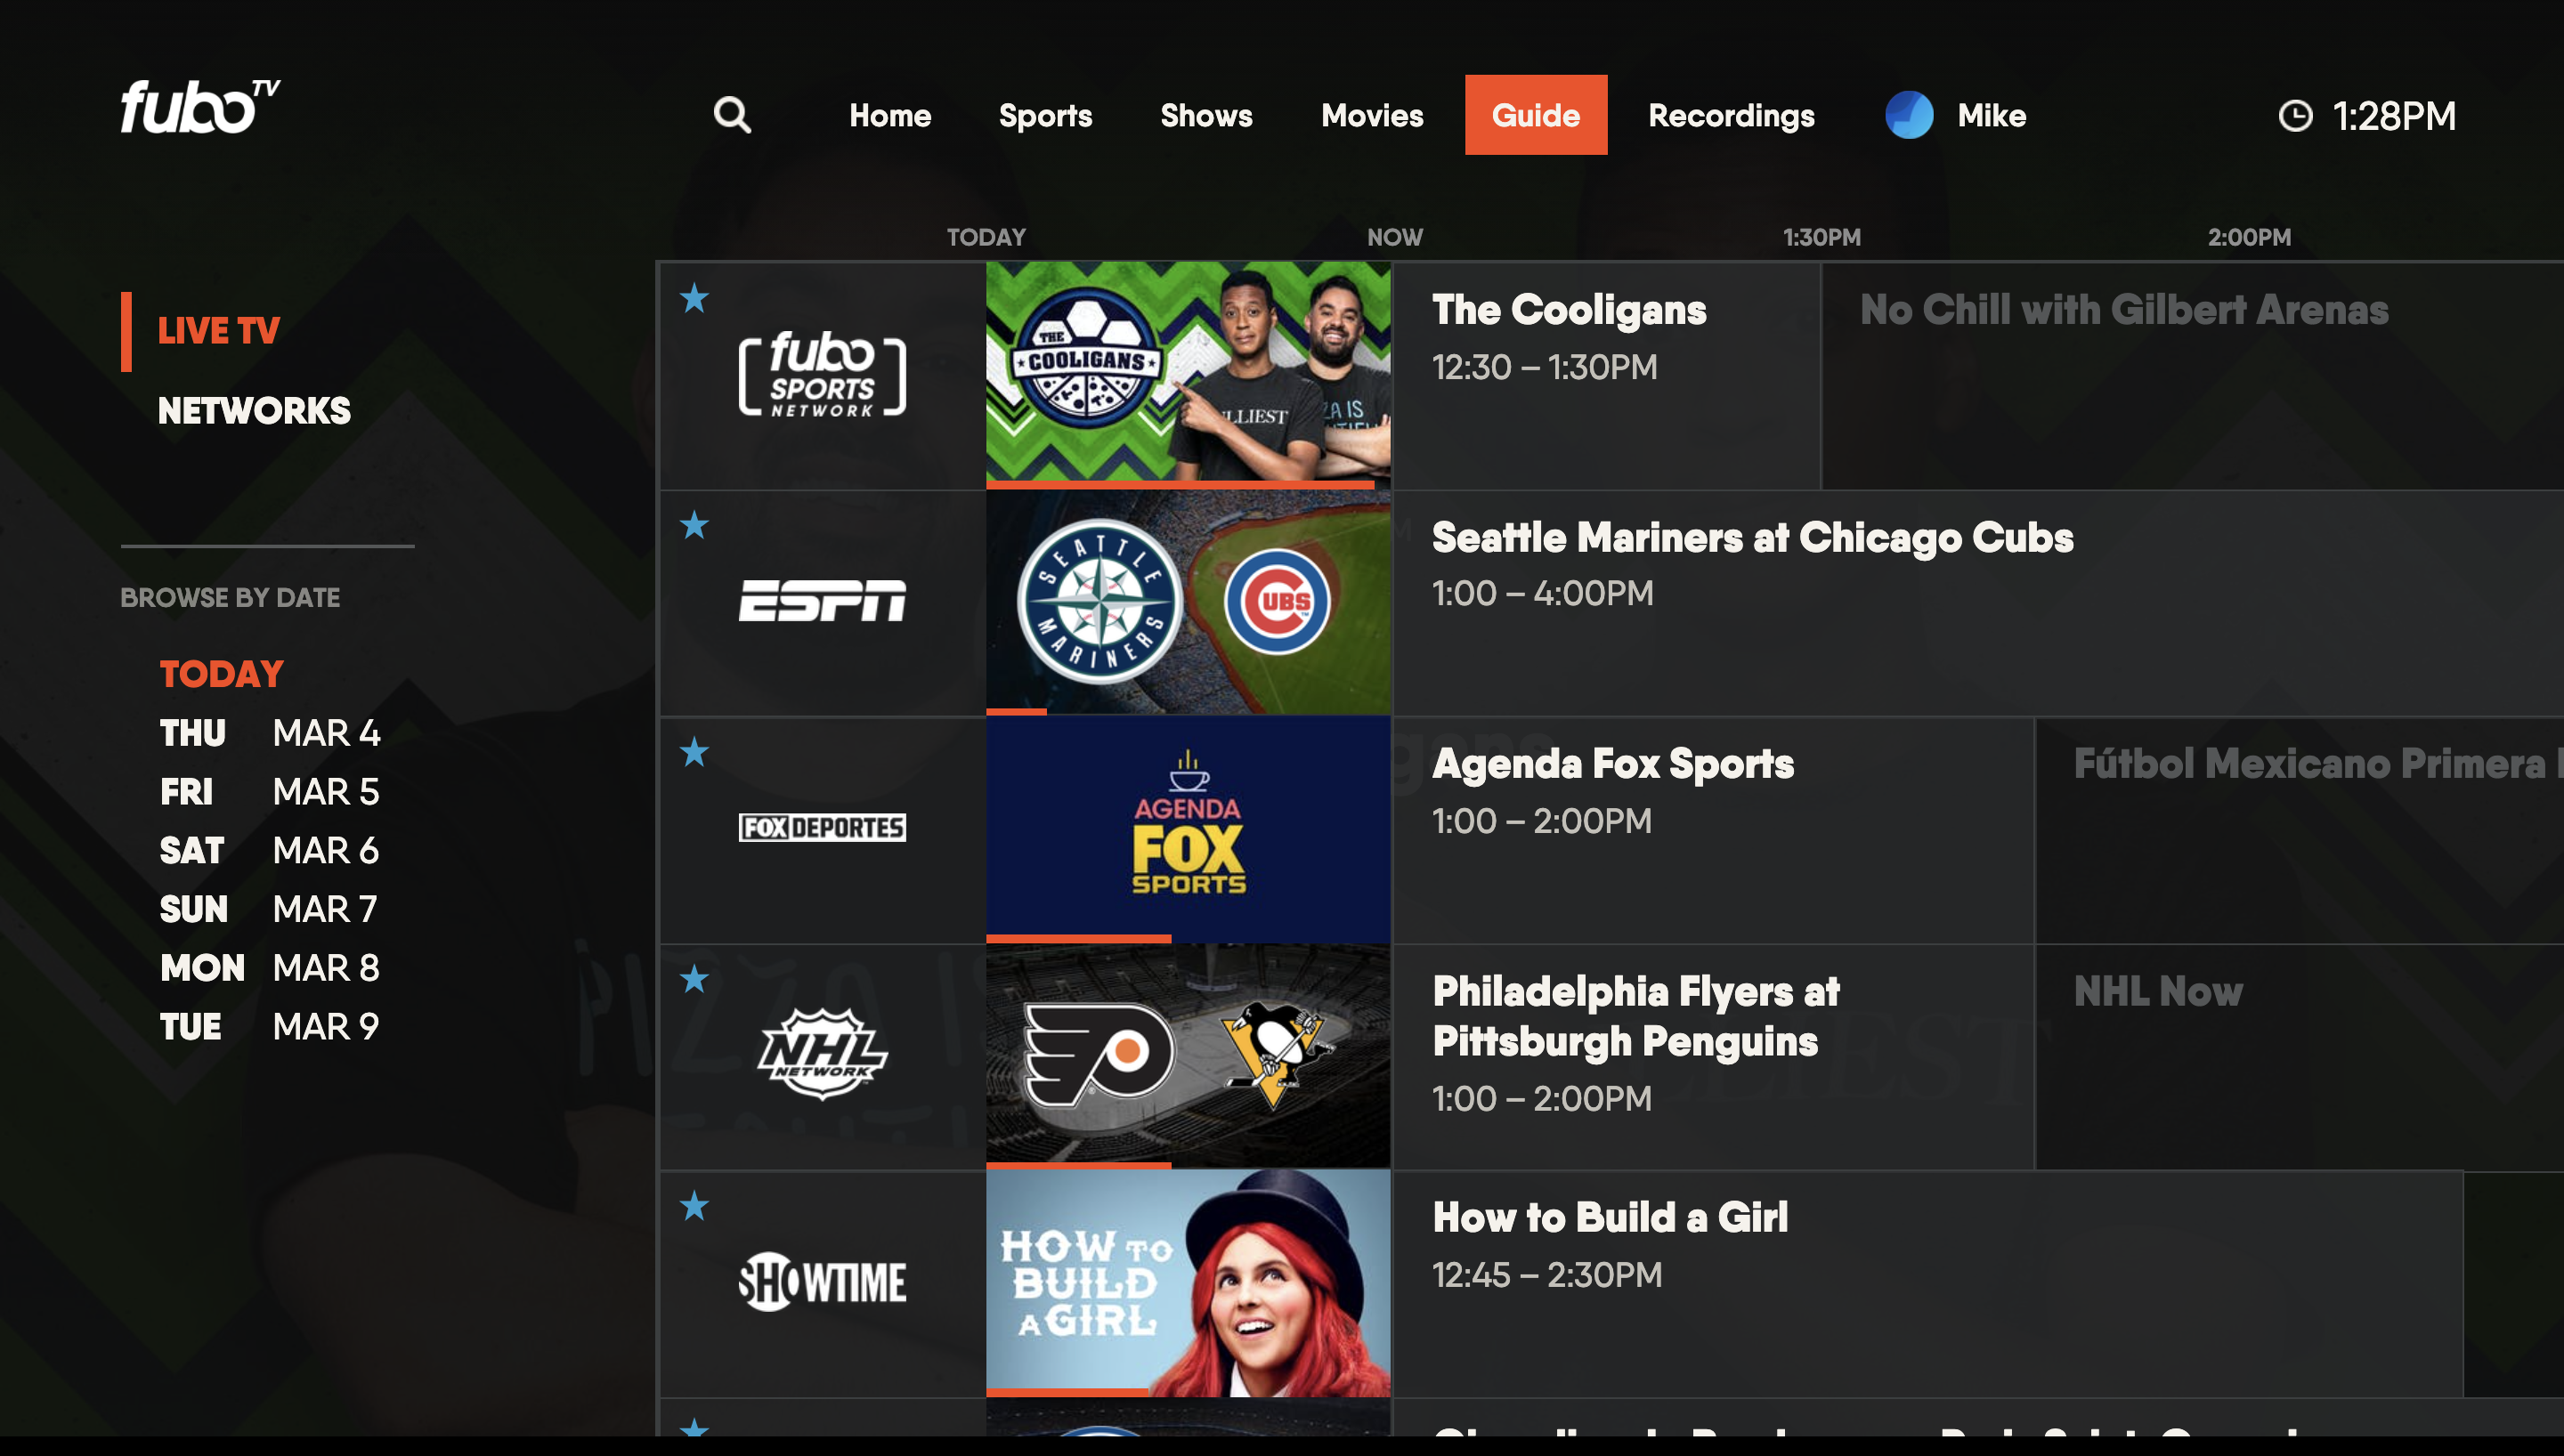 The GUIDE screen of the FuboTV app on a Vizio TV